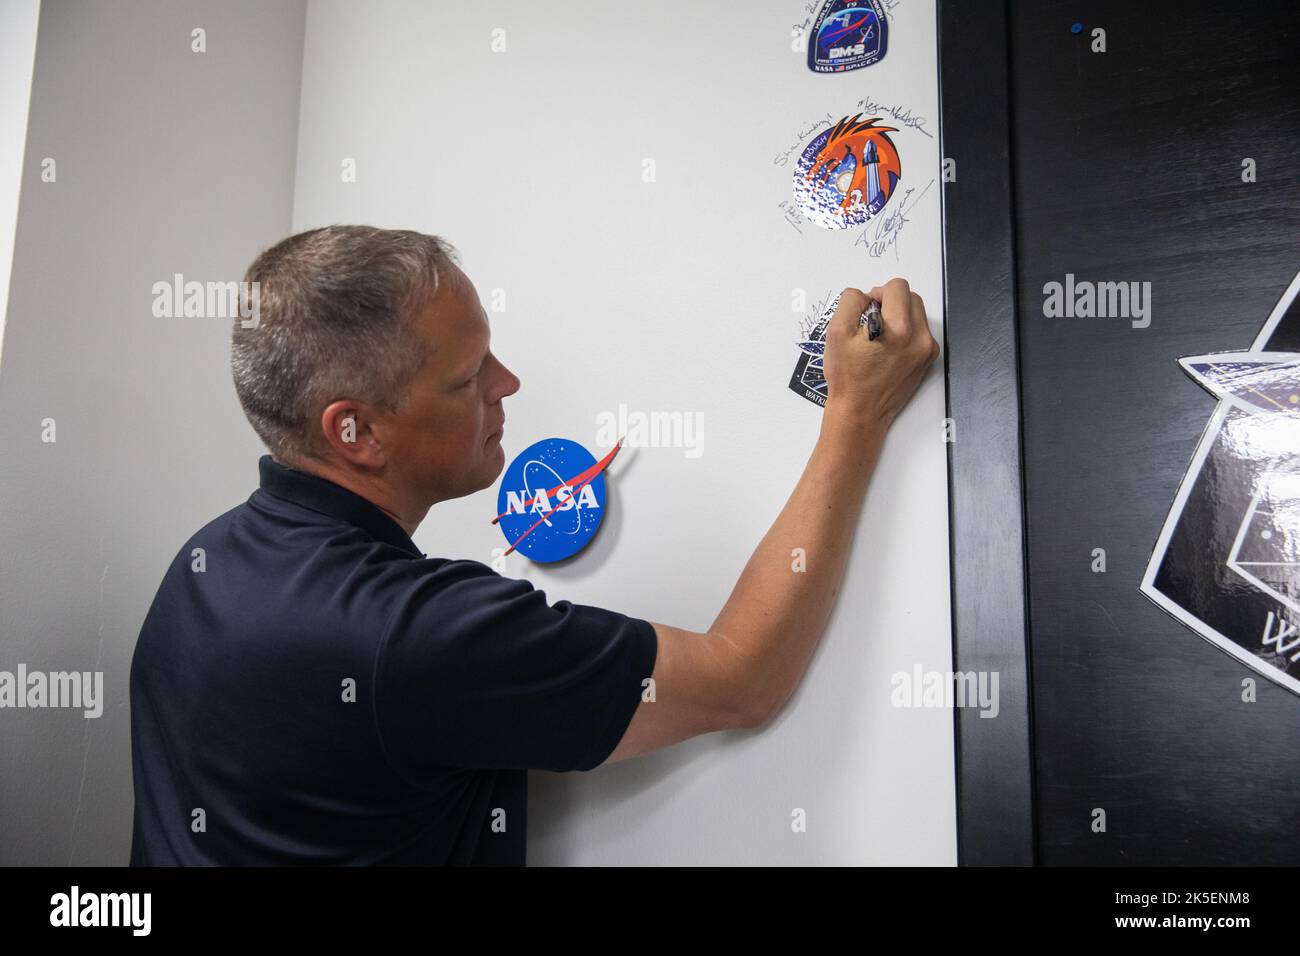 Crew-4 mission astronaut Bob Hines signs the mission patch in the Astronaut Crew Quarters inside Kennedy Space Center’s Neil A. Armstrong Operations and Checkout Building on April 27, 2022. Hines, along with Kjell Lindgren, Jessica Watkins, and Samantha Cristoforetti, will launch aboard SpaceX’s Crew Dragon – powered by the company’s Falcon 9 rocket – to the International Space Station as part of NASA’s Commercial Crew Program. Crew-4 is scheduled to lift off today at 3:52 a.m. EDT from Launch Complex 39A at Kennedy. Stock Photo